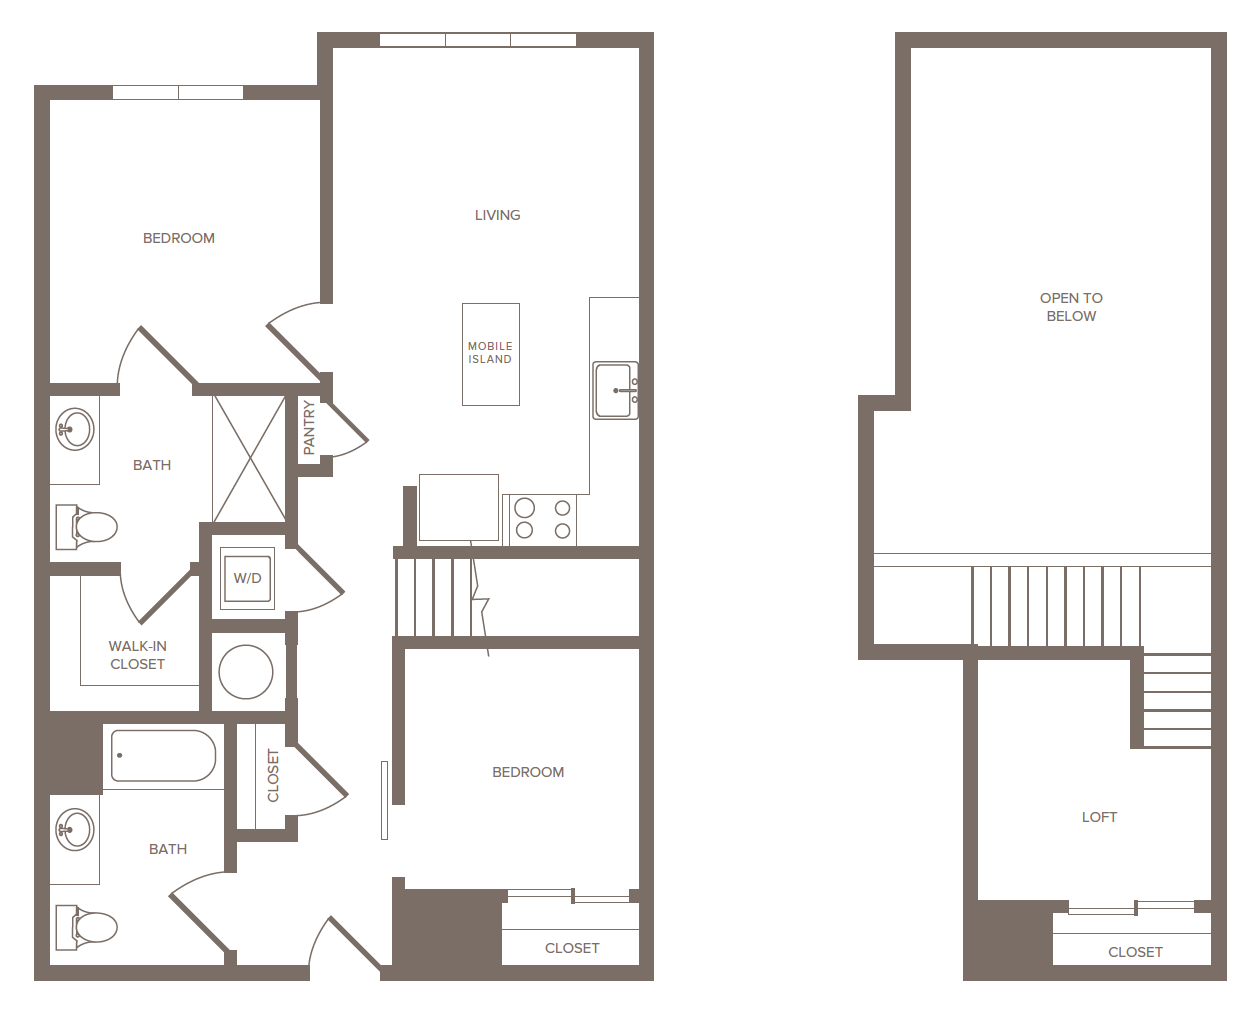 Floorplan for Apartment #2279, 1 bedroom unit at Halstead Parsippany